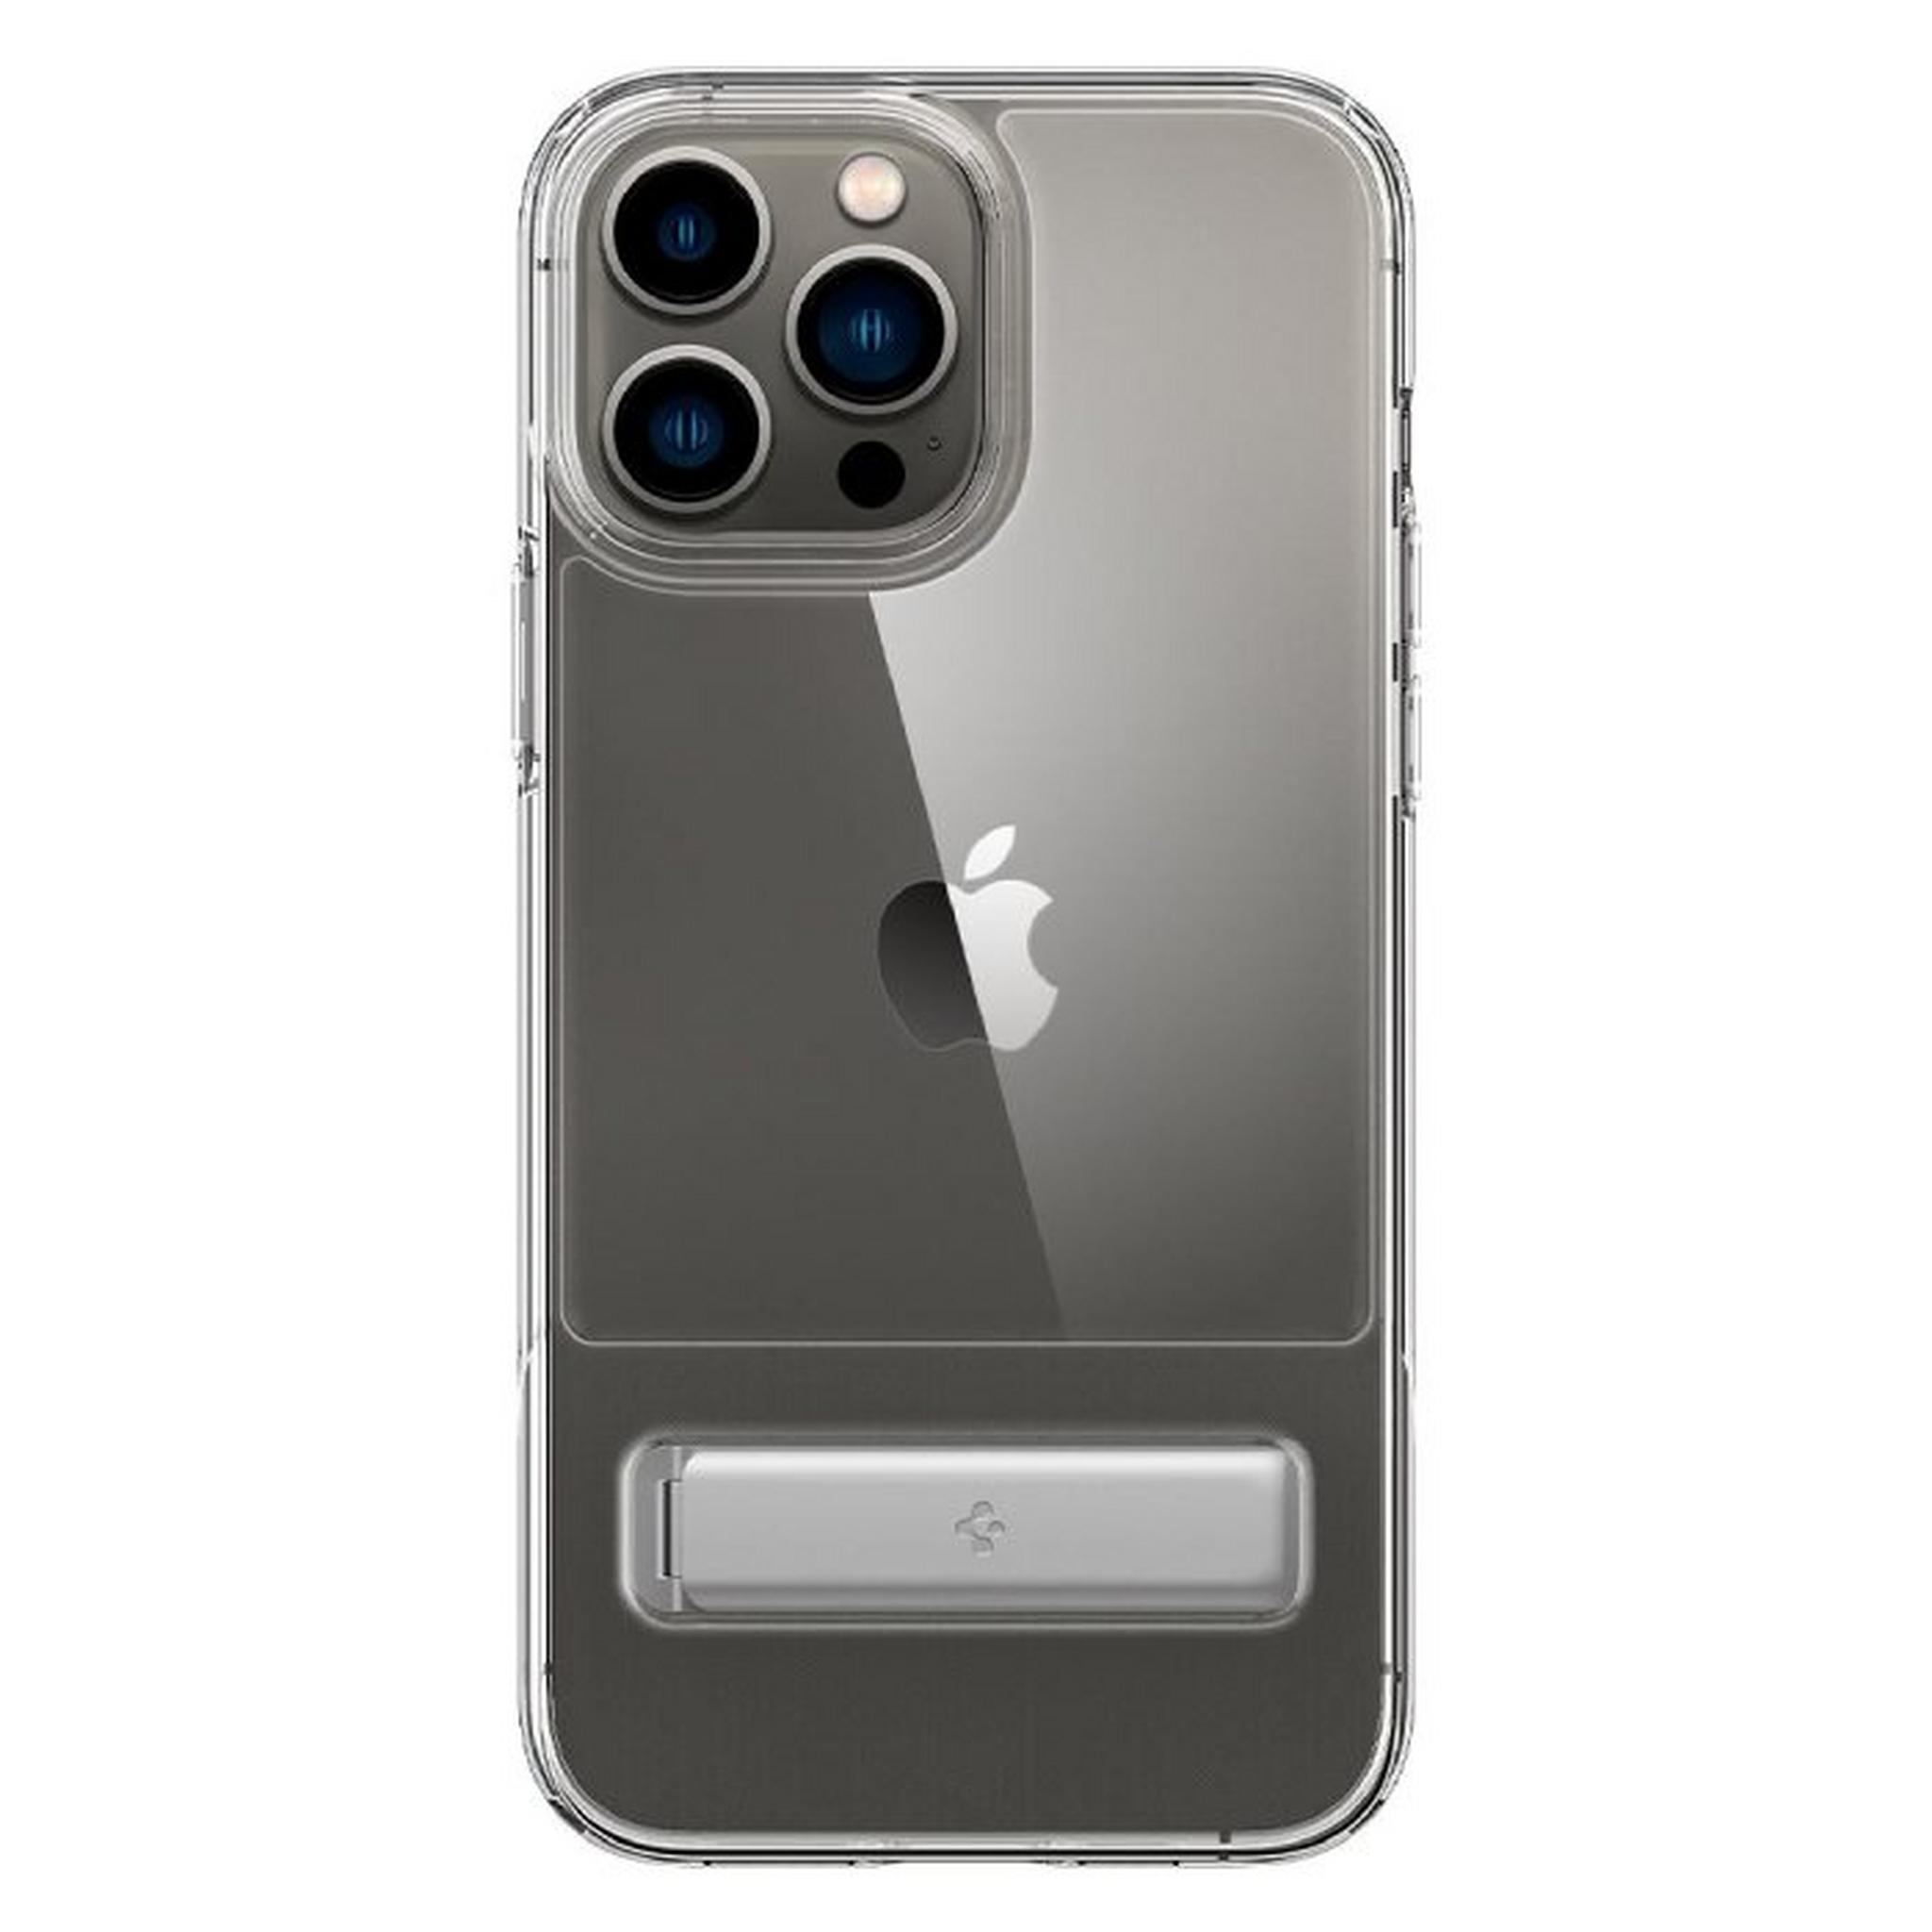 Spigen Slim Armor Case w/Stand for iPhone 13 Pro Max - Clear